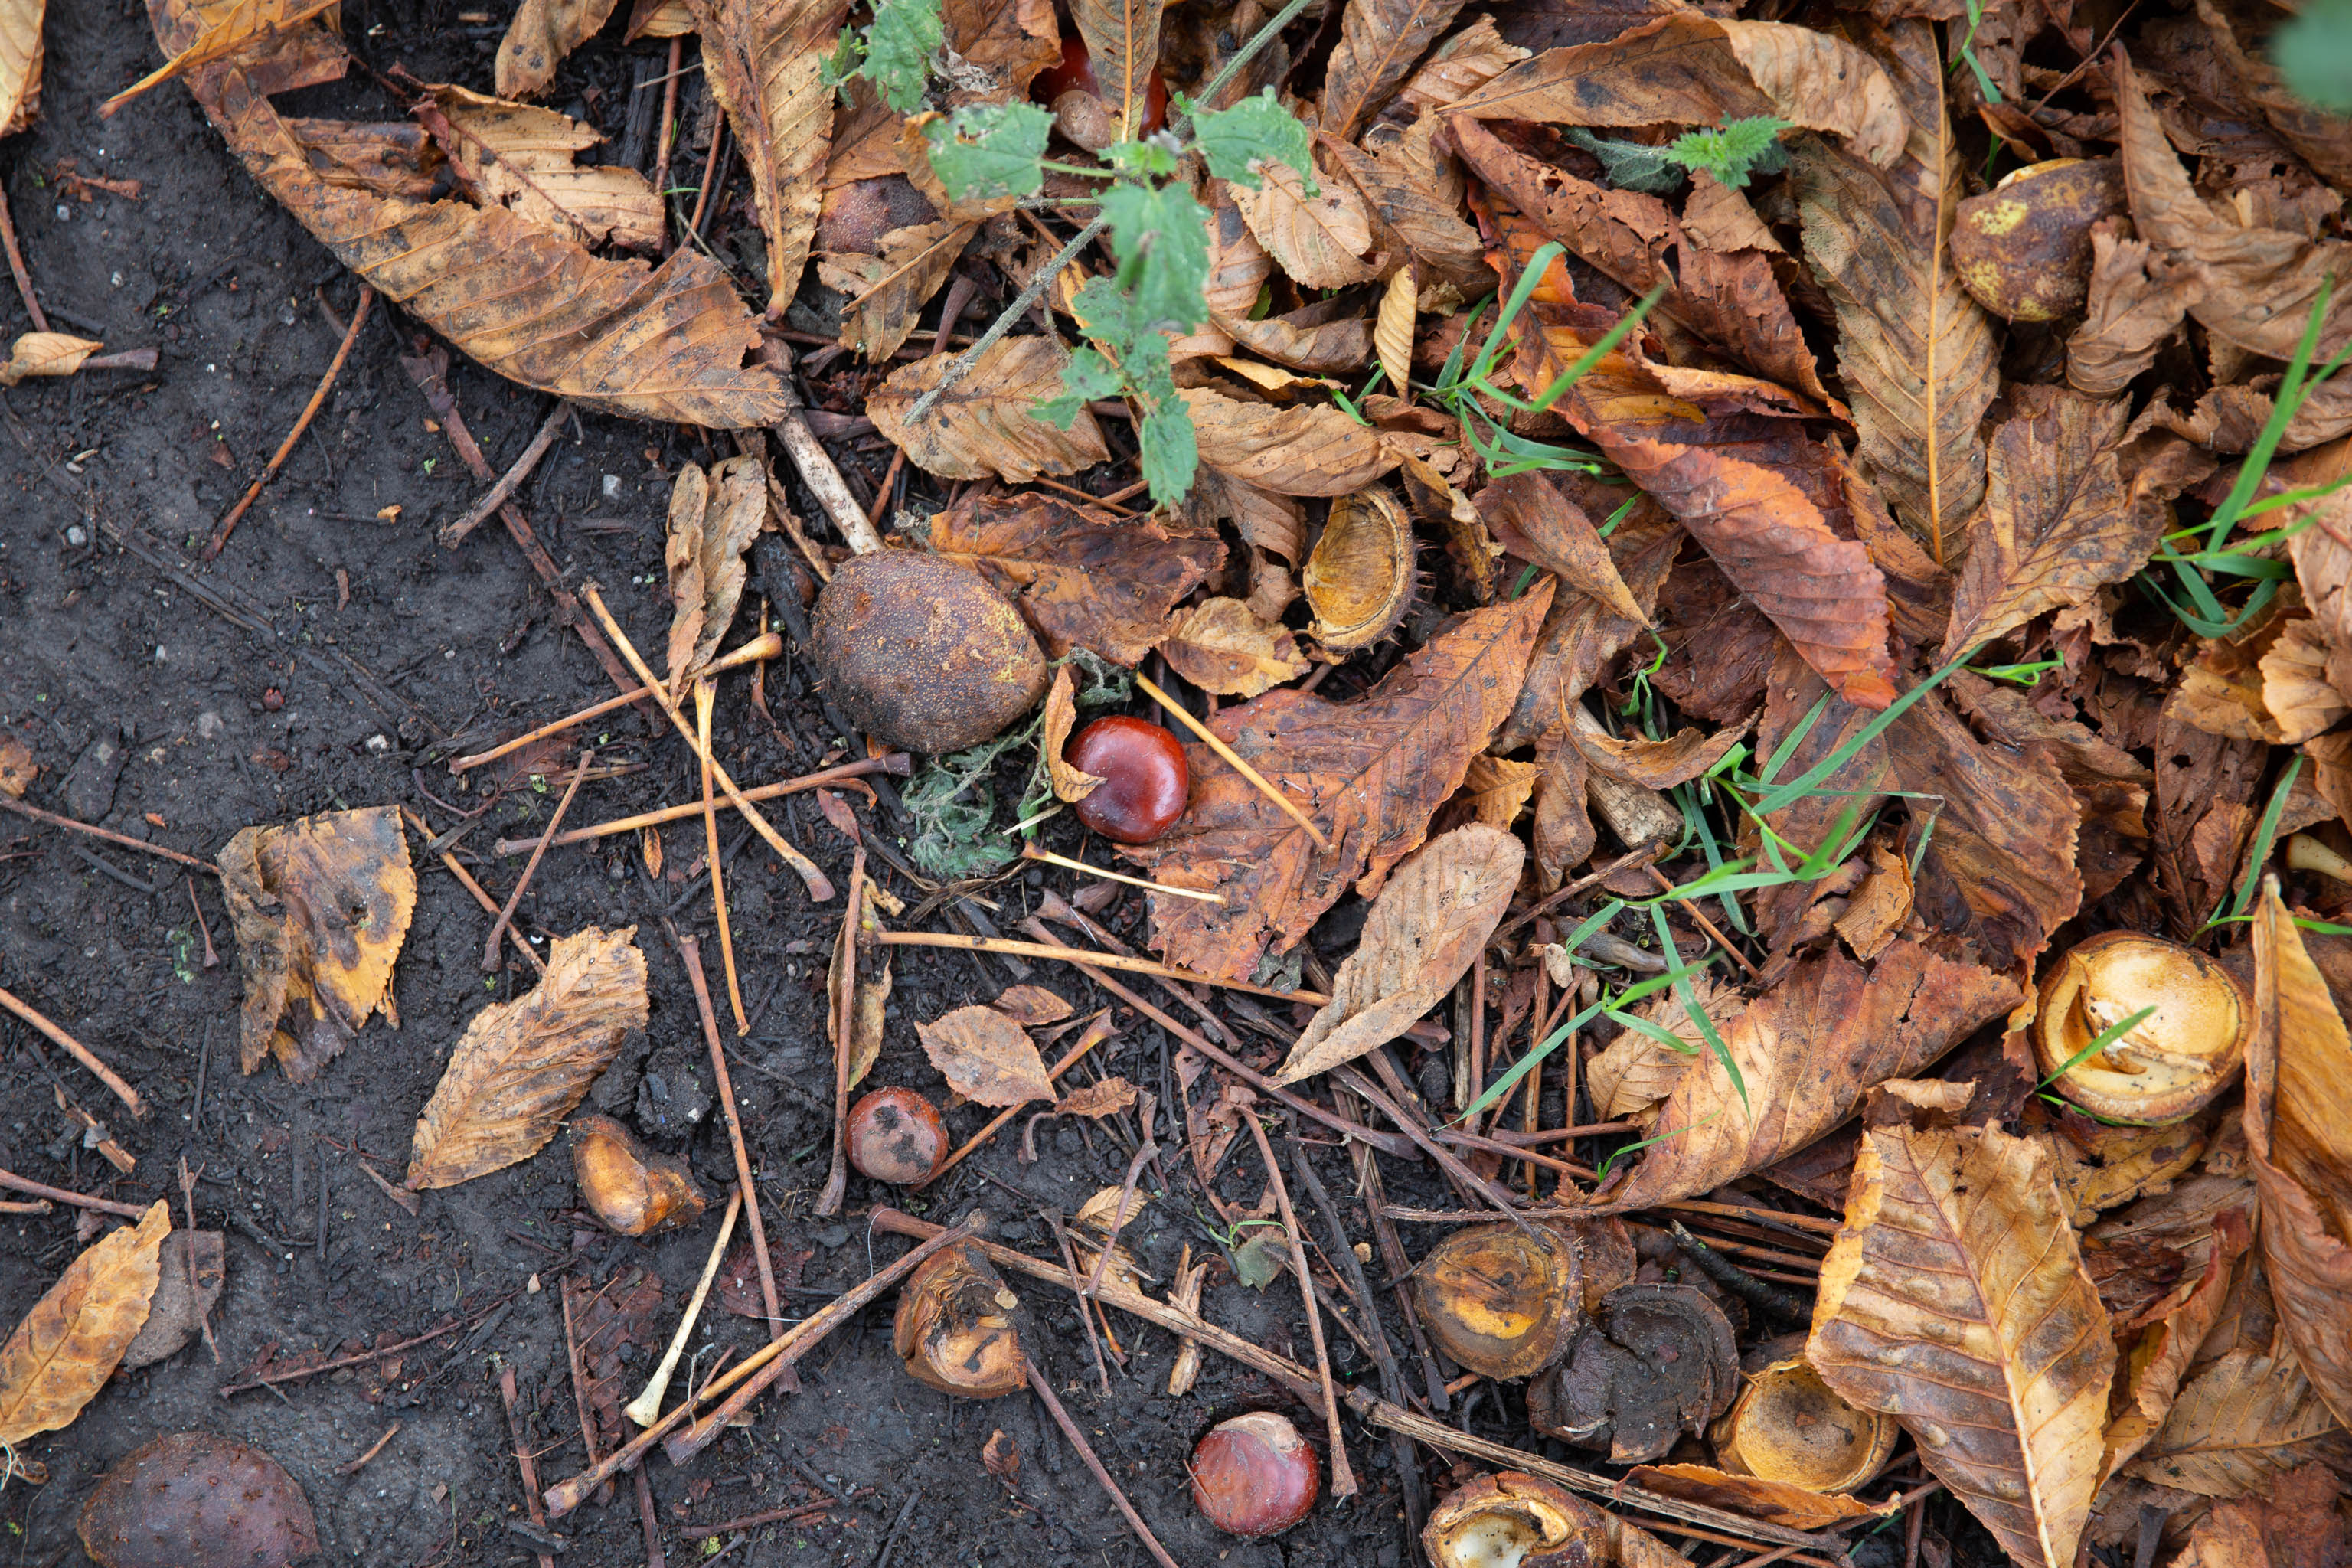 Conkers
There's a line of horse chestnuts between Ashton Avenue Bridge and Clifton Bridge Station, all of which seemed to be producing some excellent conke...